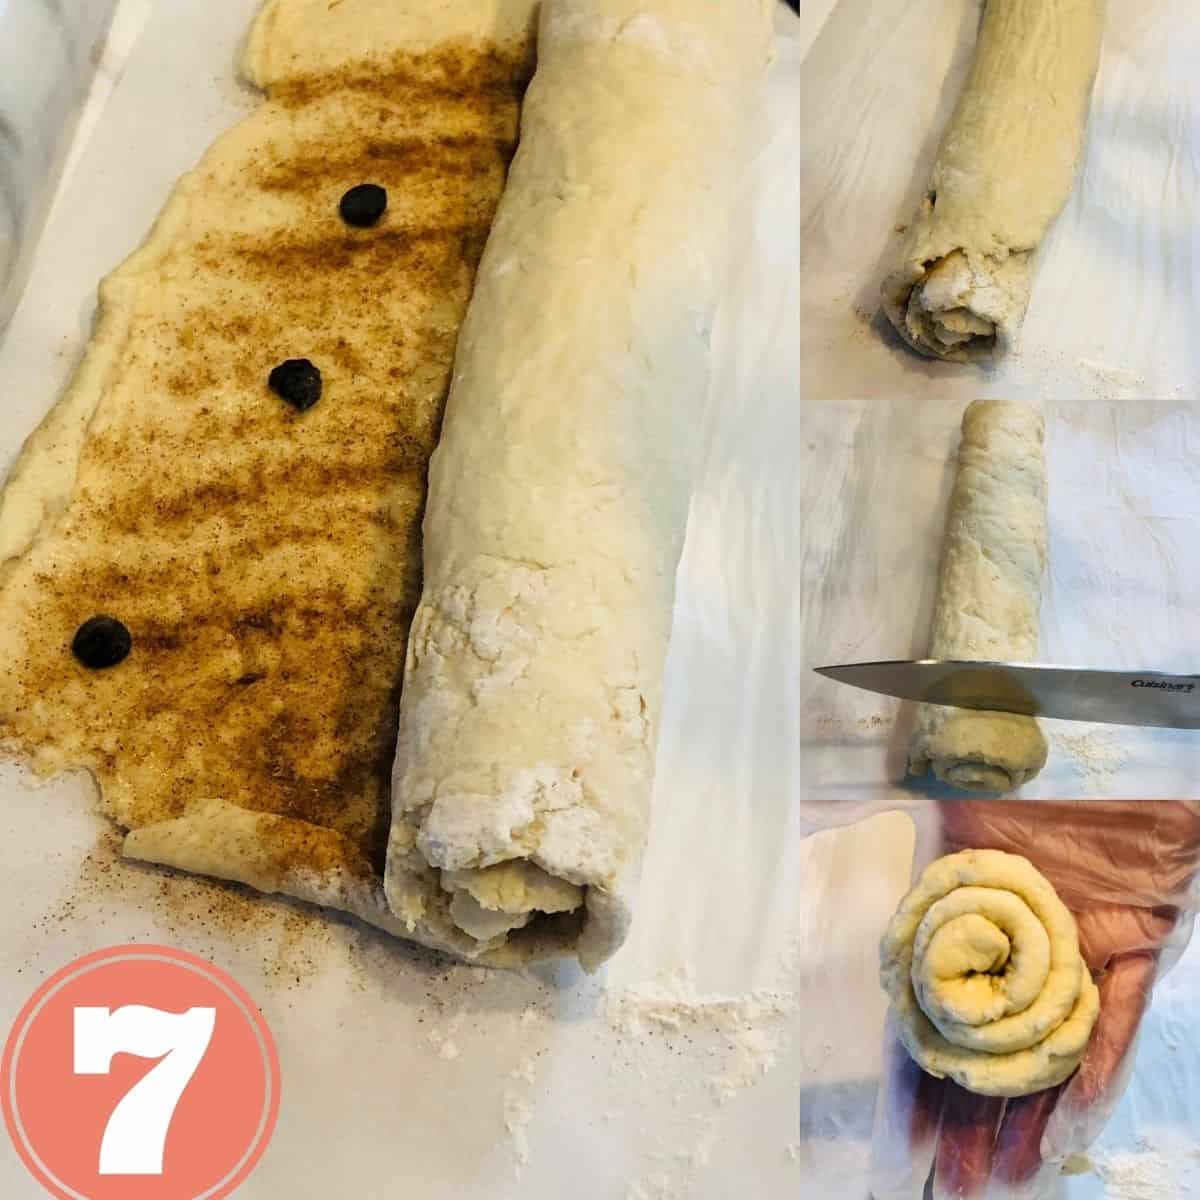 Rolled dough with cinnamon and sugar being sliced with a knife into cinnamon rolls